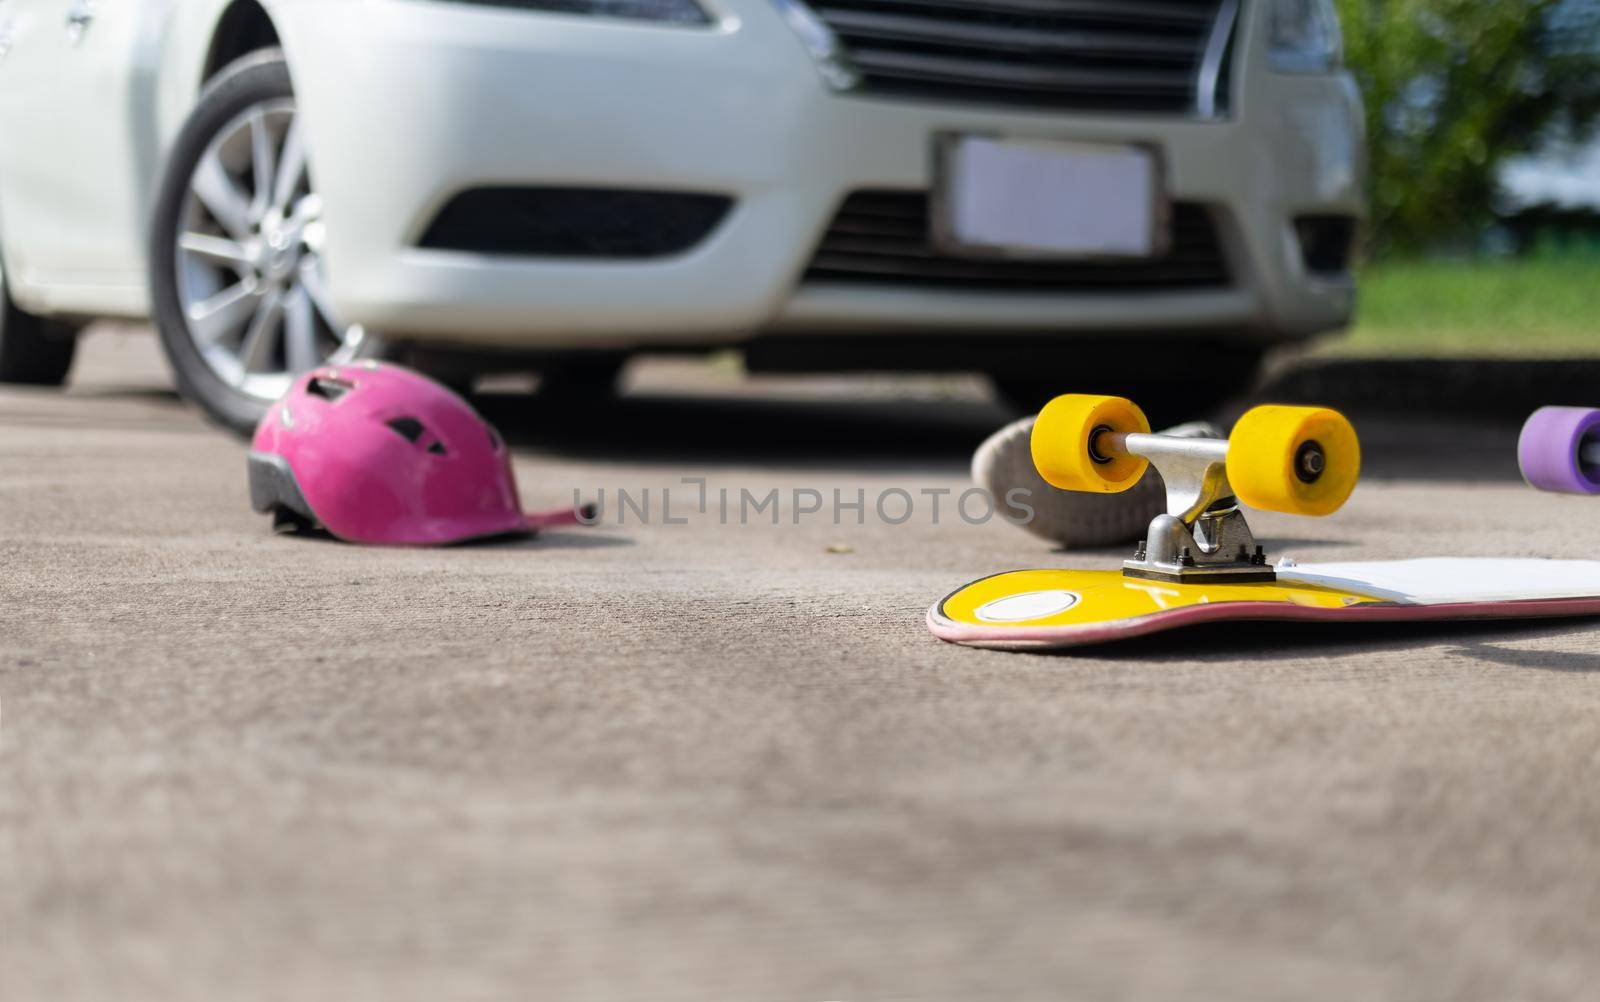 Accident skateboard crashes car after stunt on street and lost control.